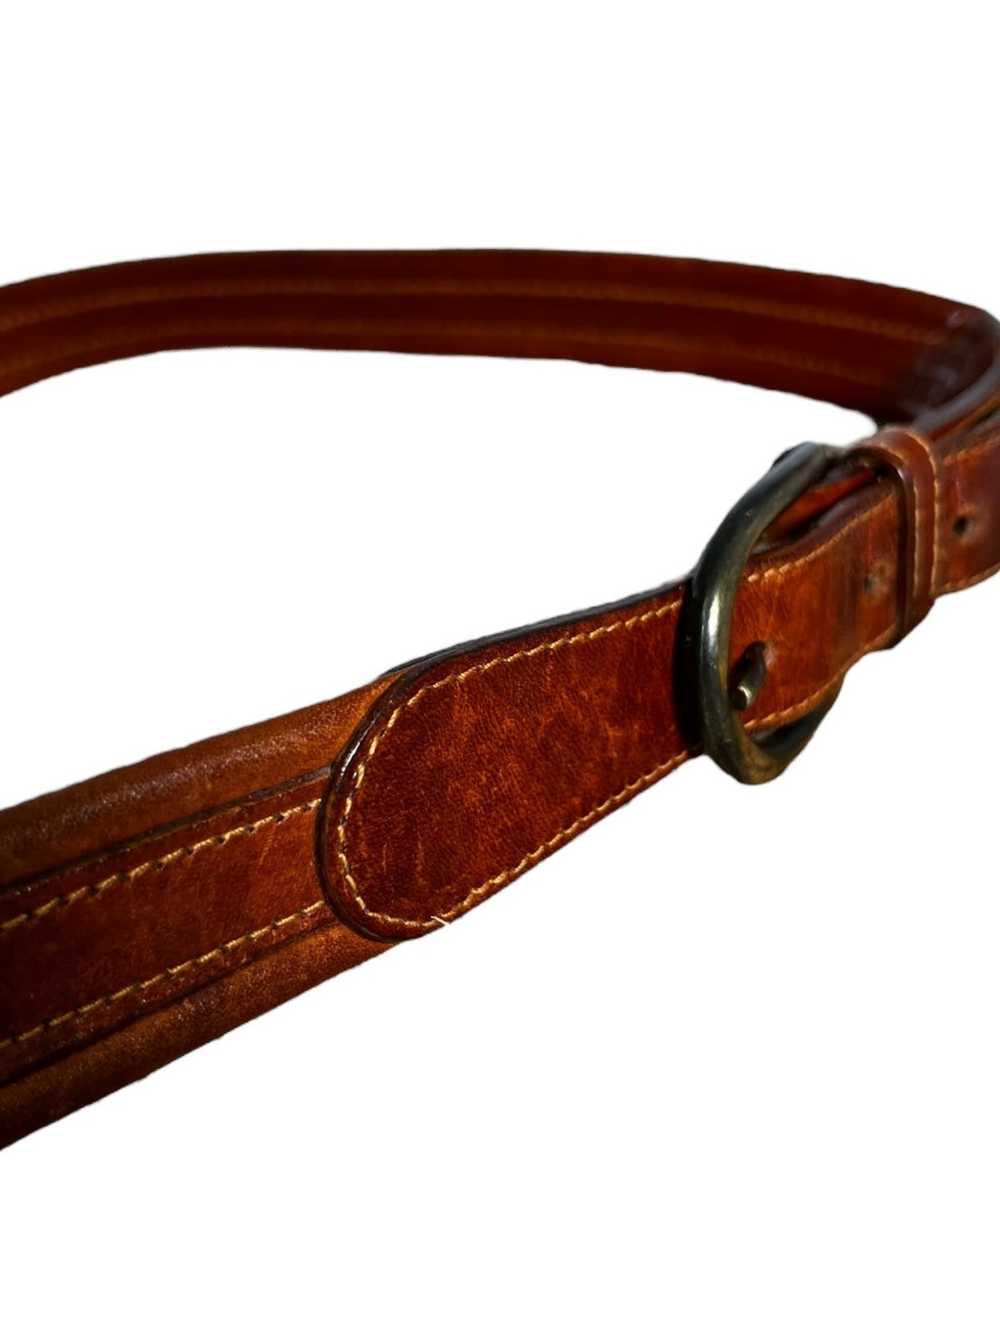 Jaeger Leather Belt Made in Italy - image 5